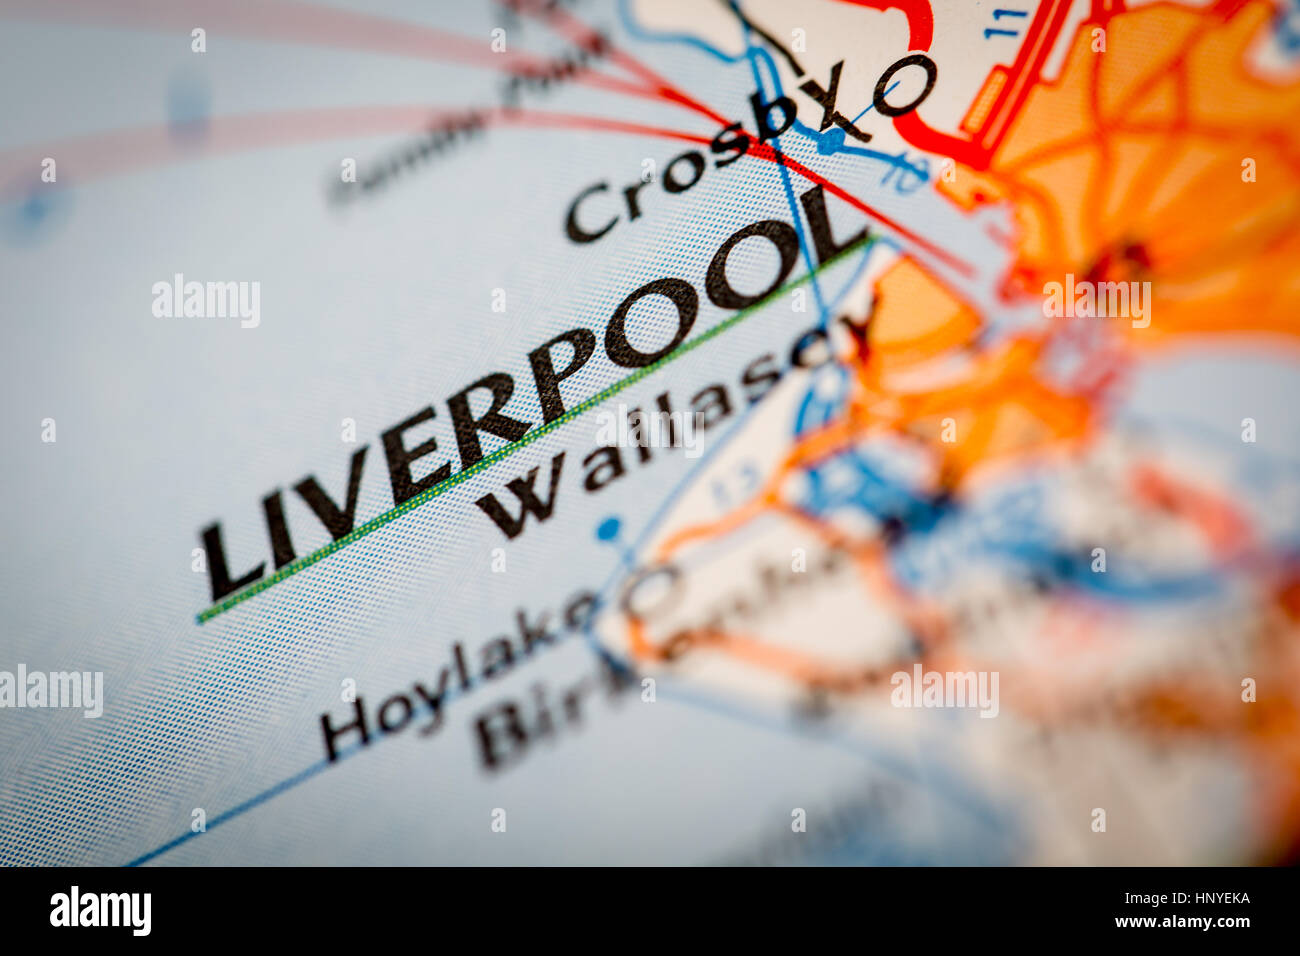 Map Photography: Liverpool City on a Road Map Stock Photo